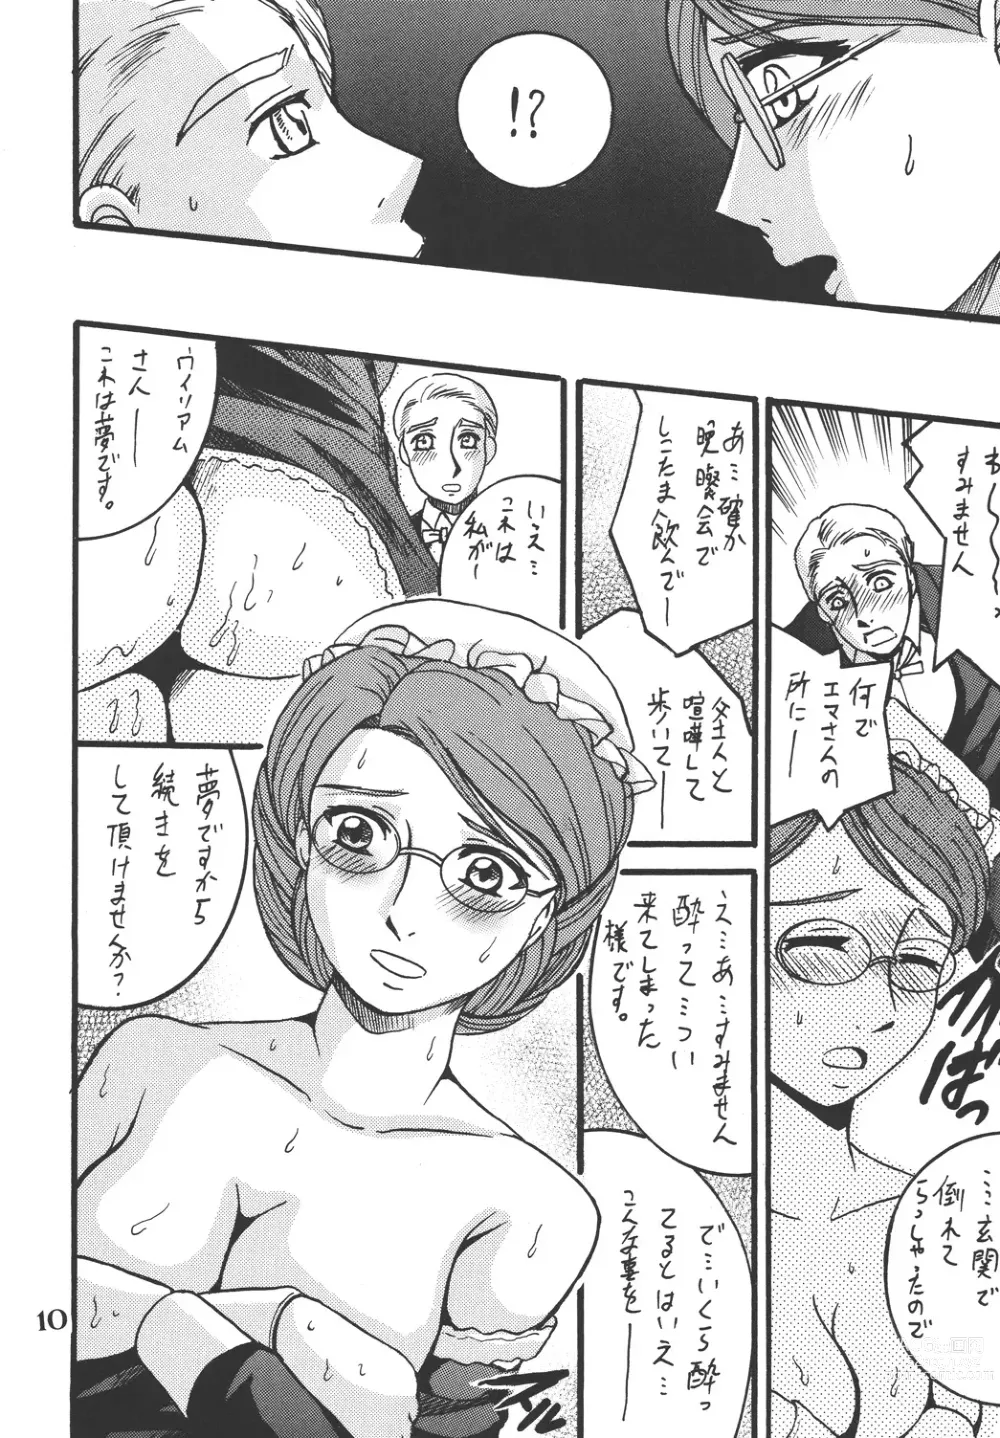 Page 10 of doujinshi Before the Emma Departure